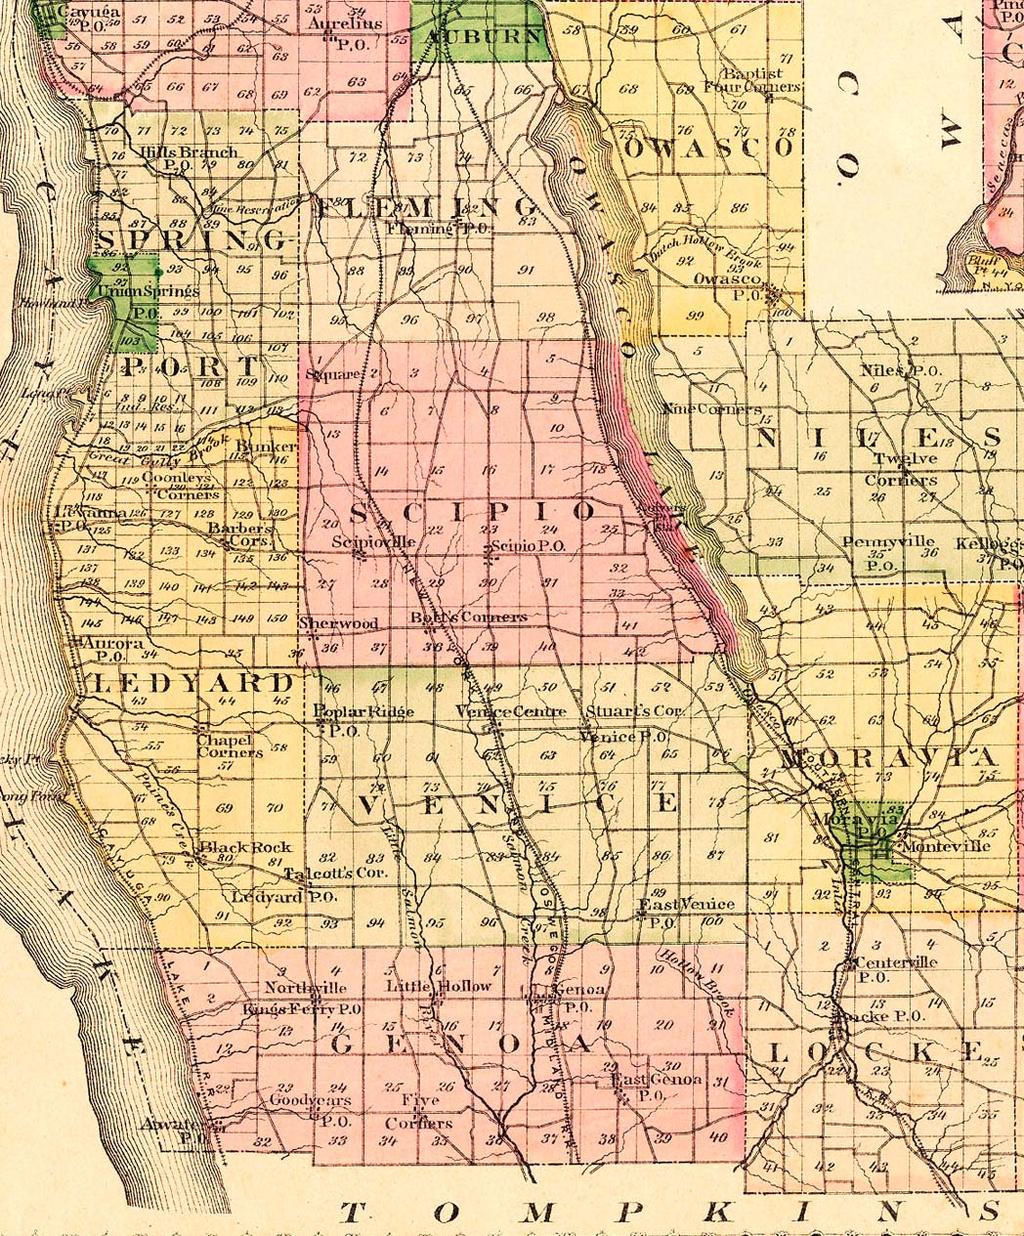 1875 map showing the Cayuga Lake Railroad and the New York Oswego & Midland Railroad crossing through the Town of